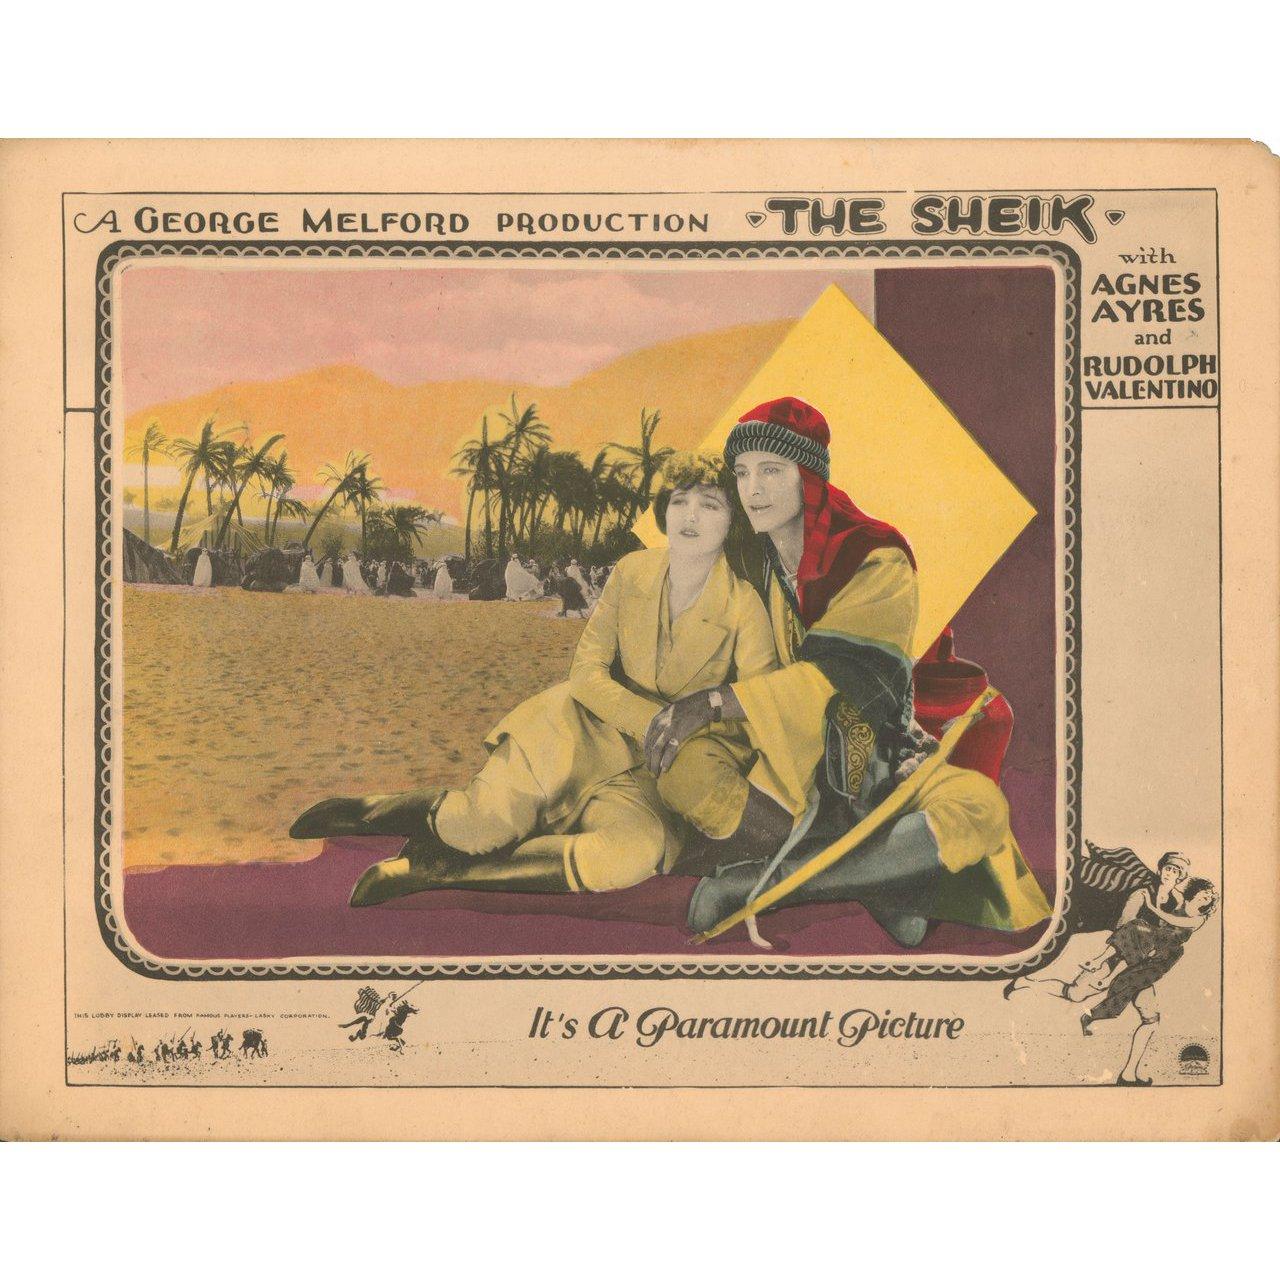 Original 1921 U.S. scene card for the film The Sheik directed by George Melford with Rudolph Valentino / Agnes Ayres / Ruth Miller / George Waggner. Very Good condition. Please note: the size is stated in inches and the actual size can vary by an